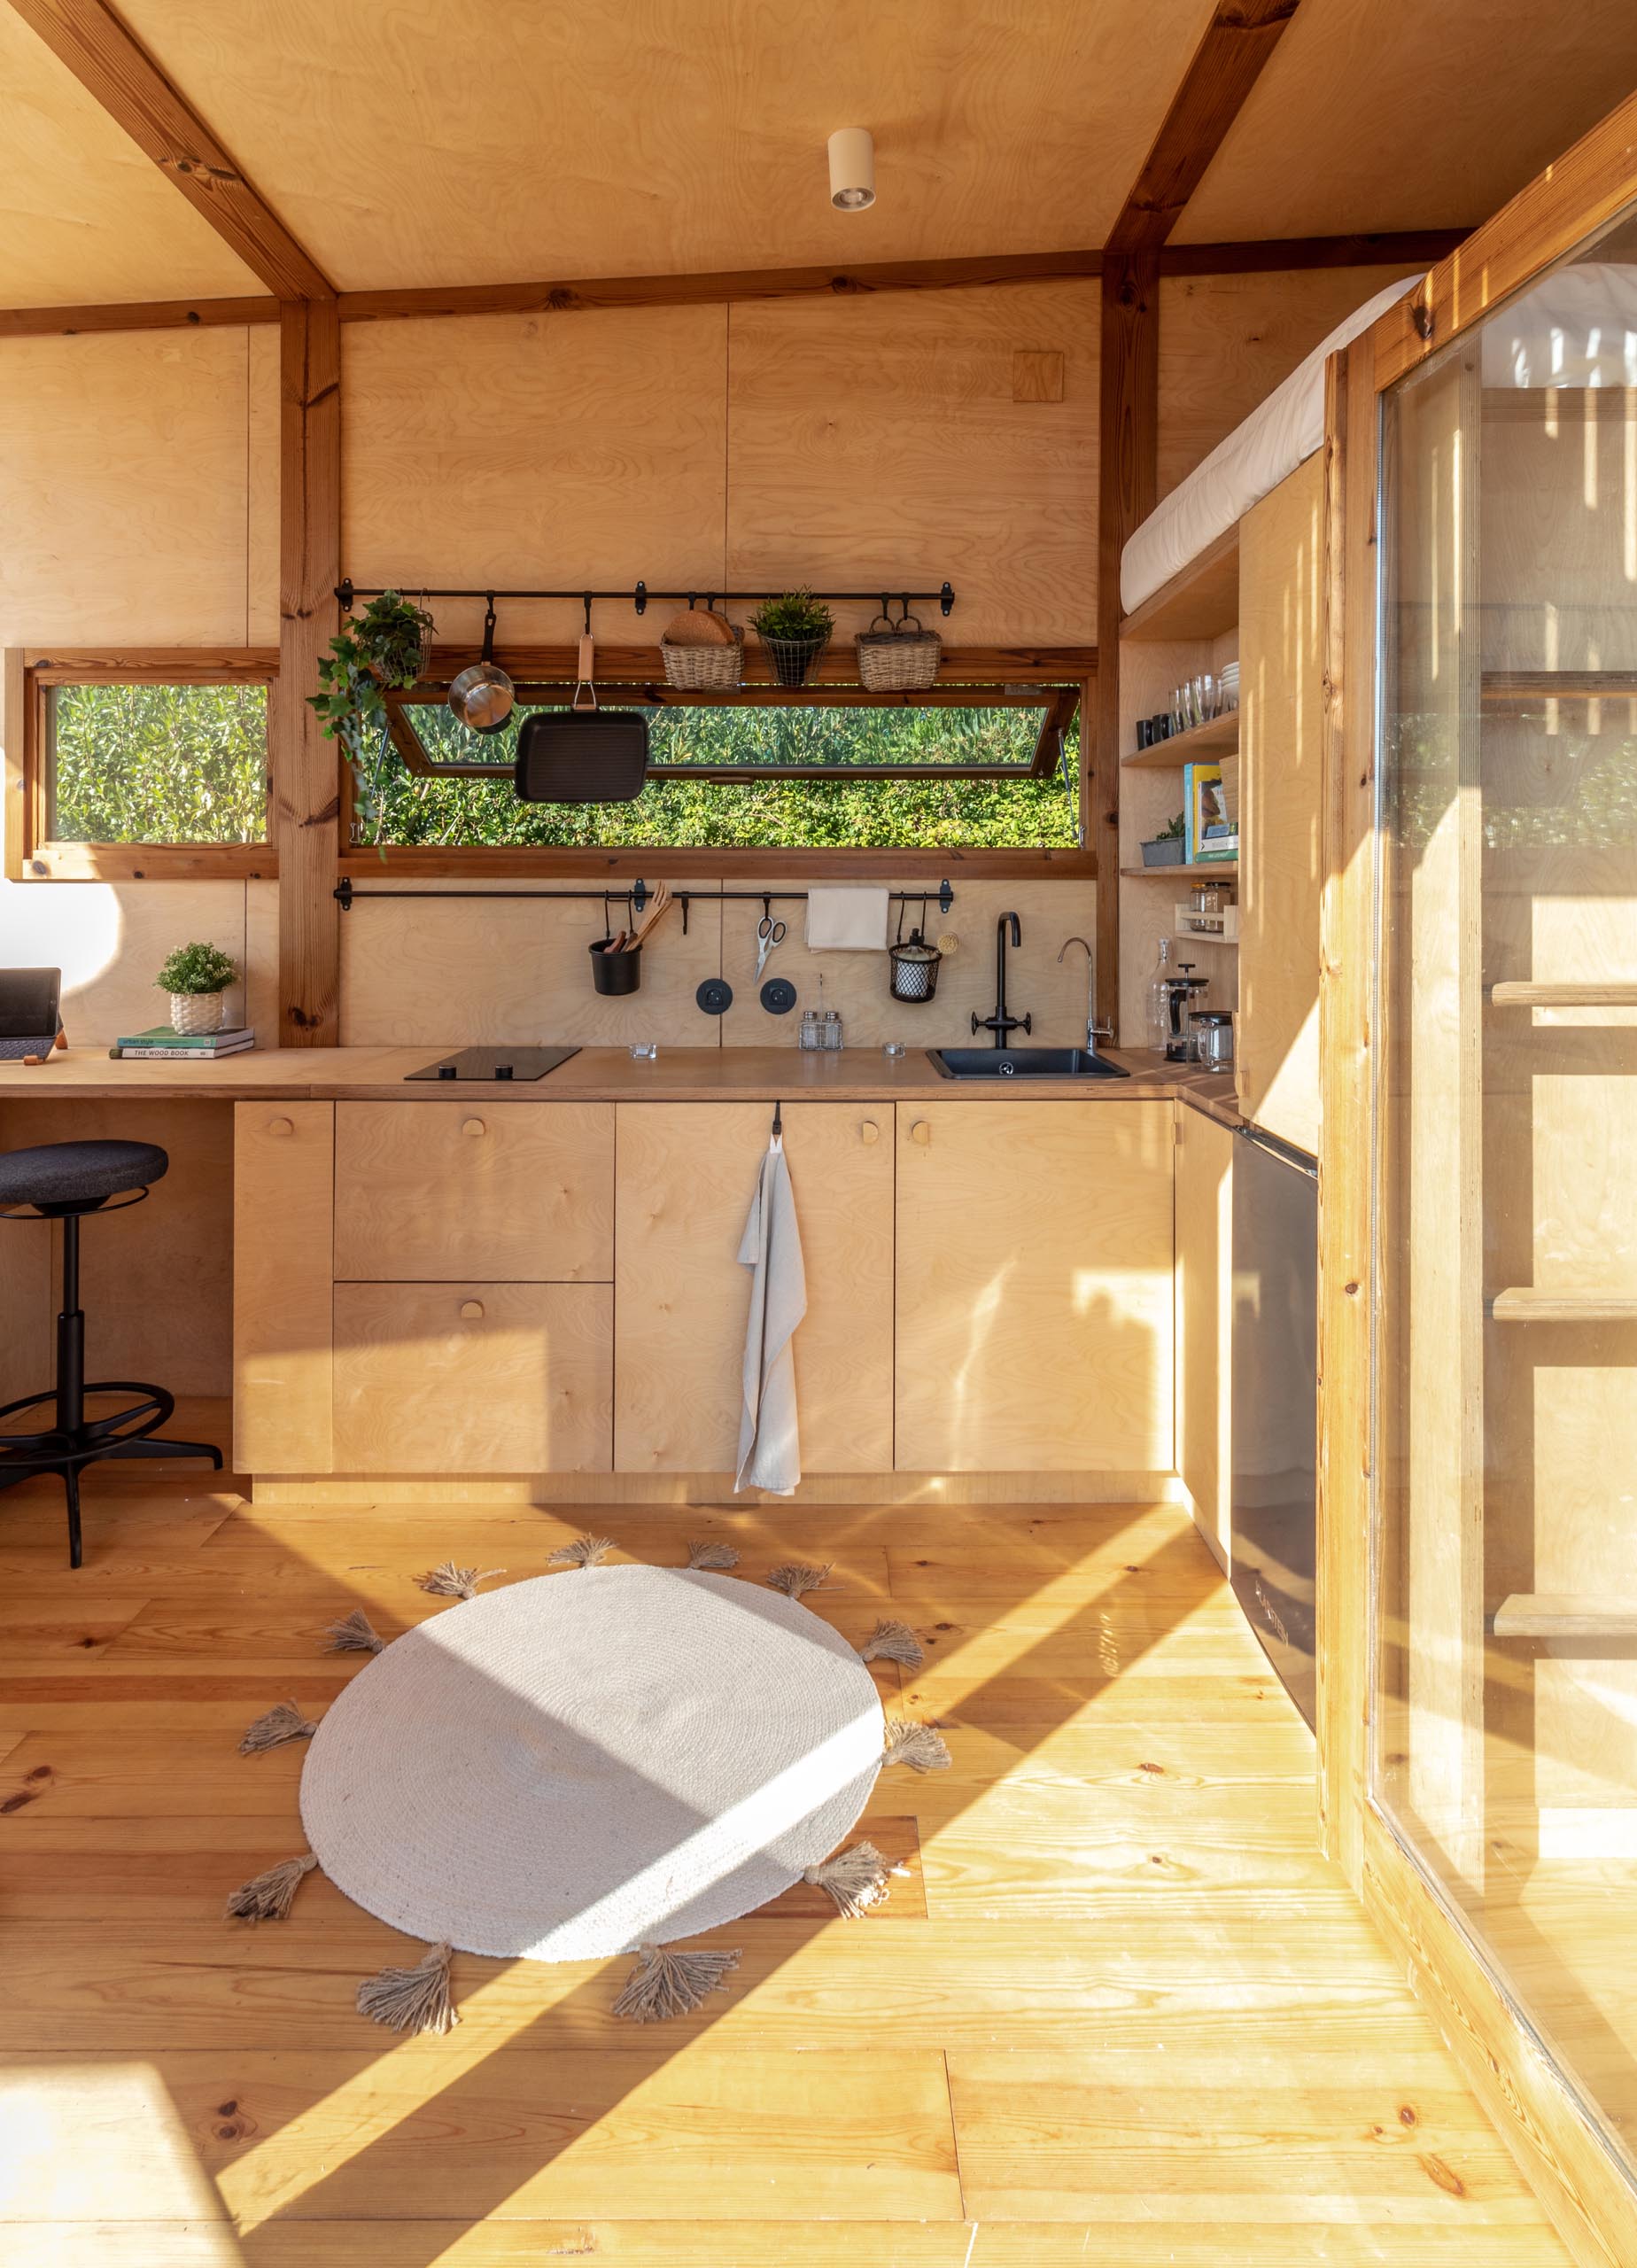 Stepping inside this modern tiny house, and the interior walls and ceiling are covered with birch plywood panels. A small kitchen with a window has a fridge, cooktop, and sink.